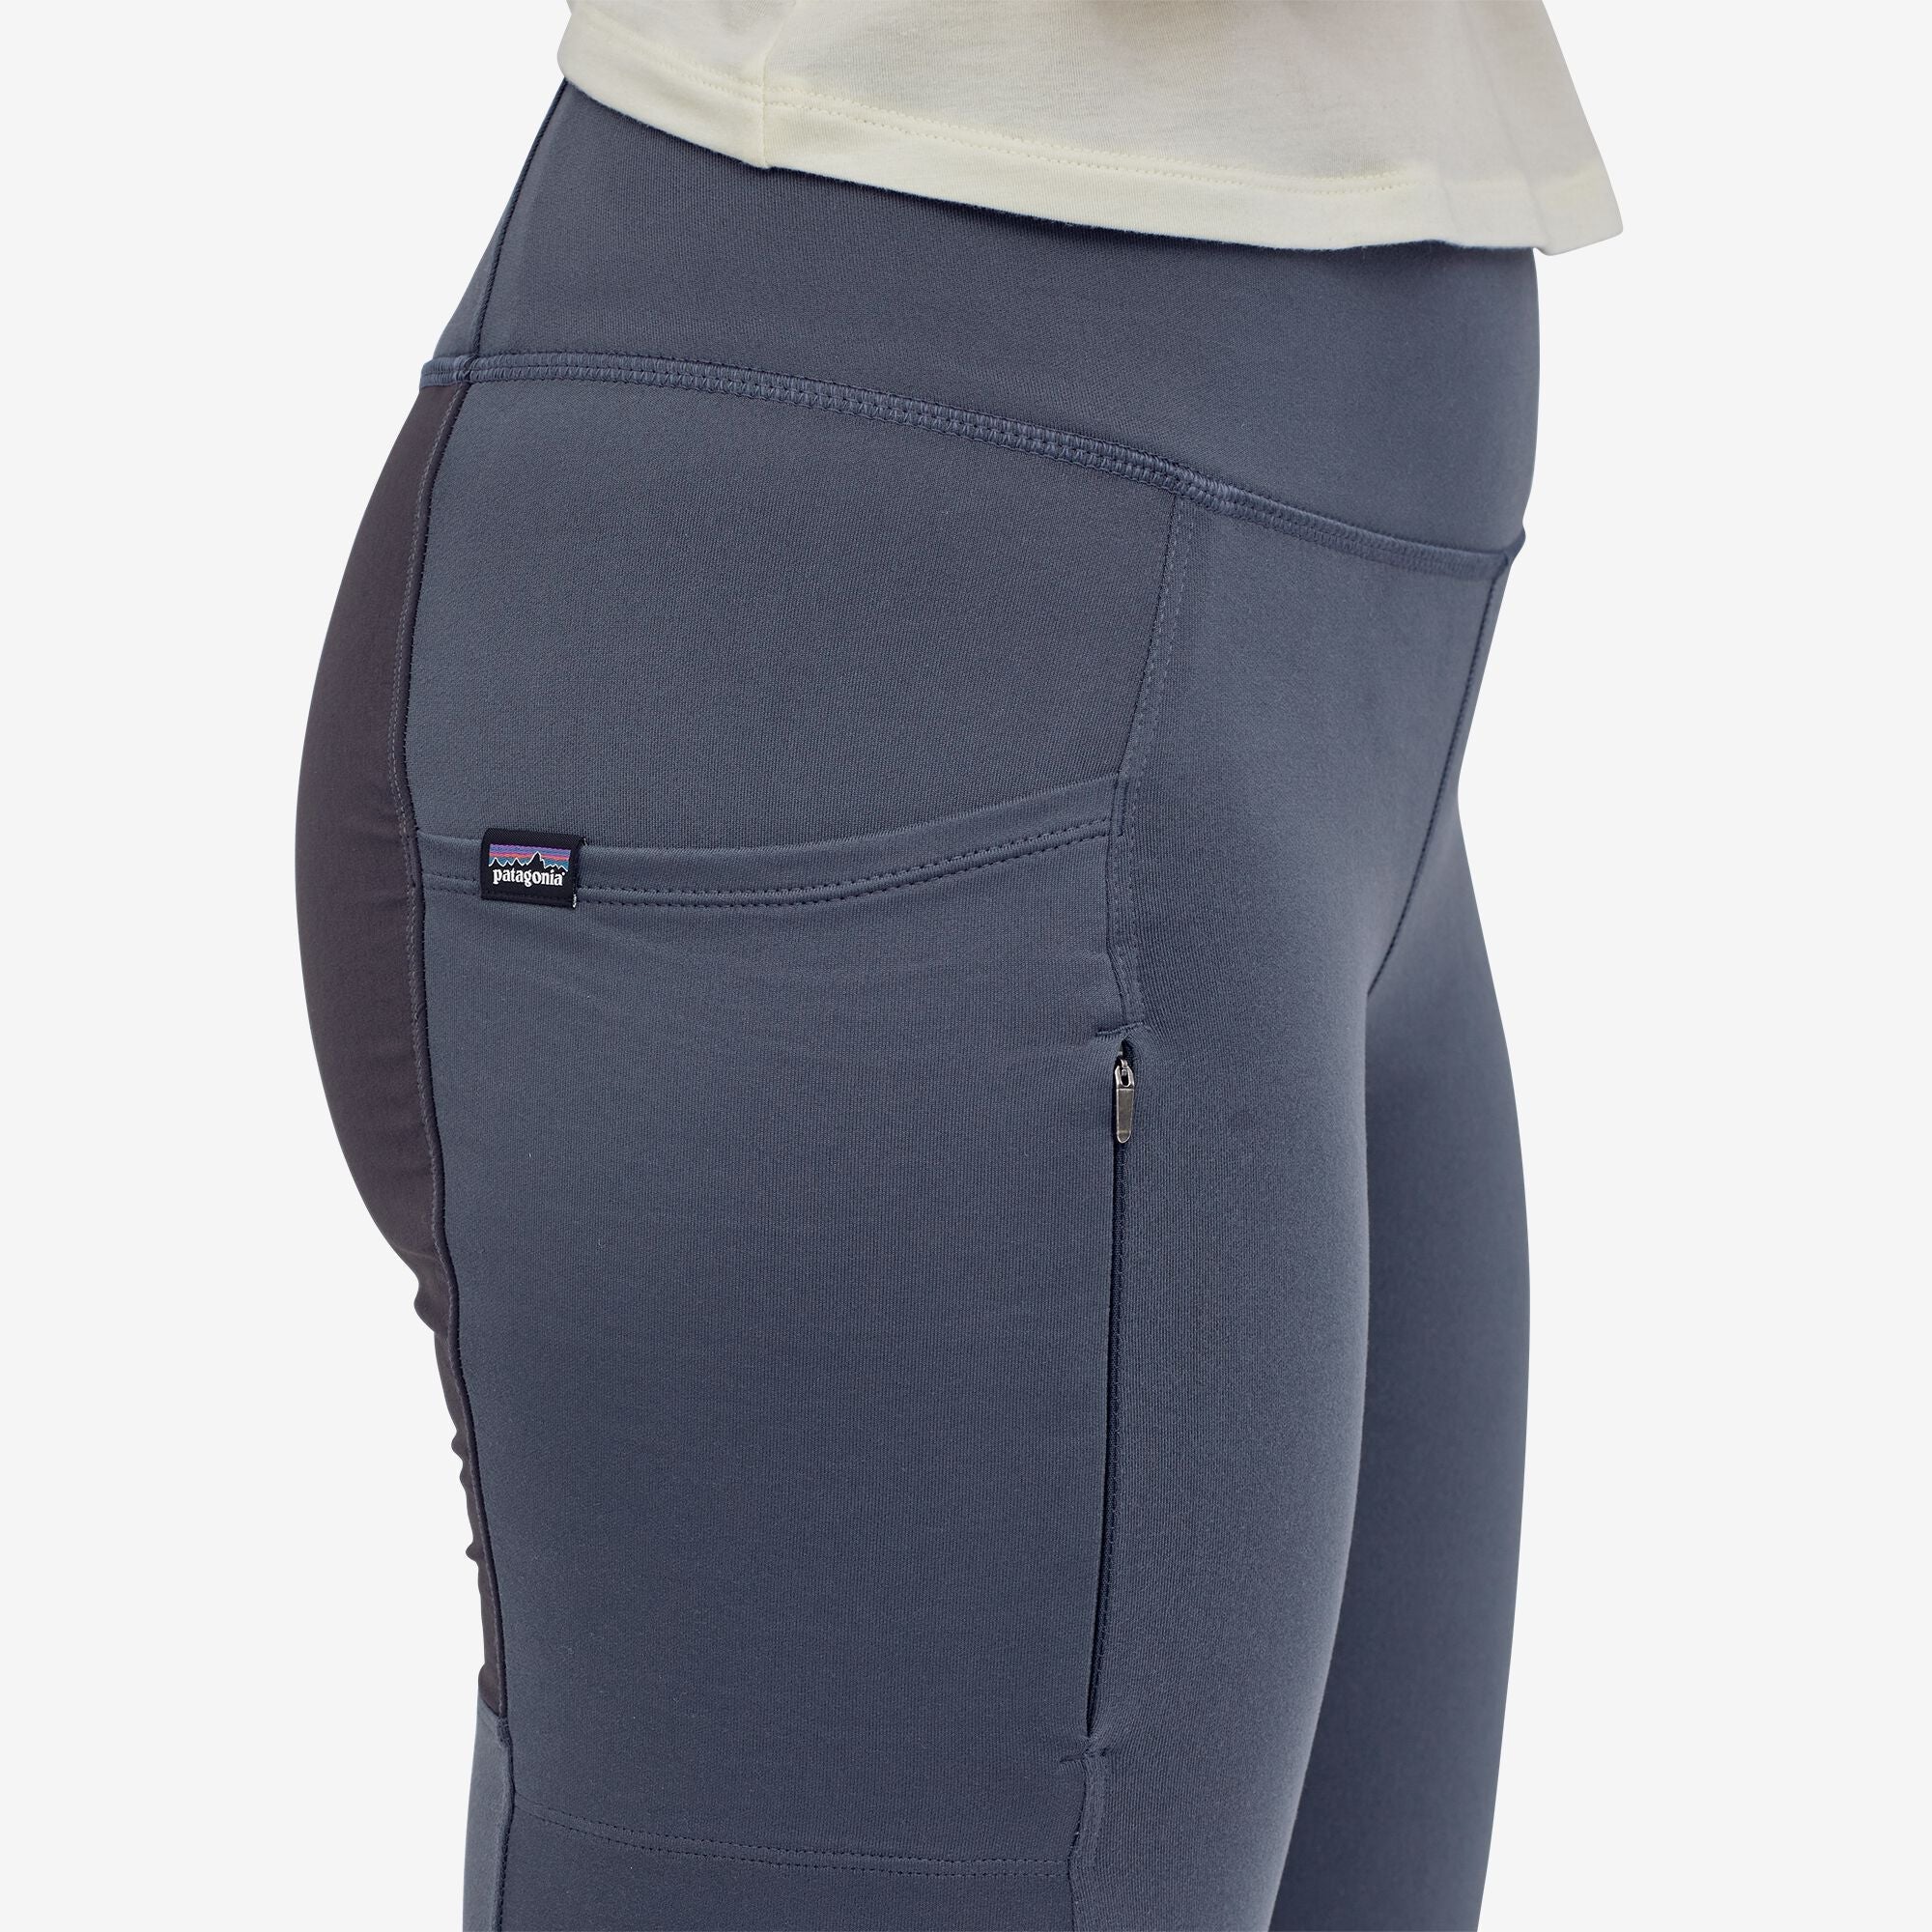 Patagonia Pack Out Tights - Women's